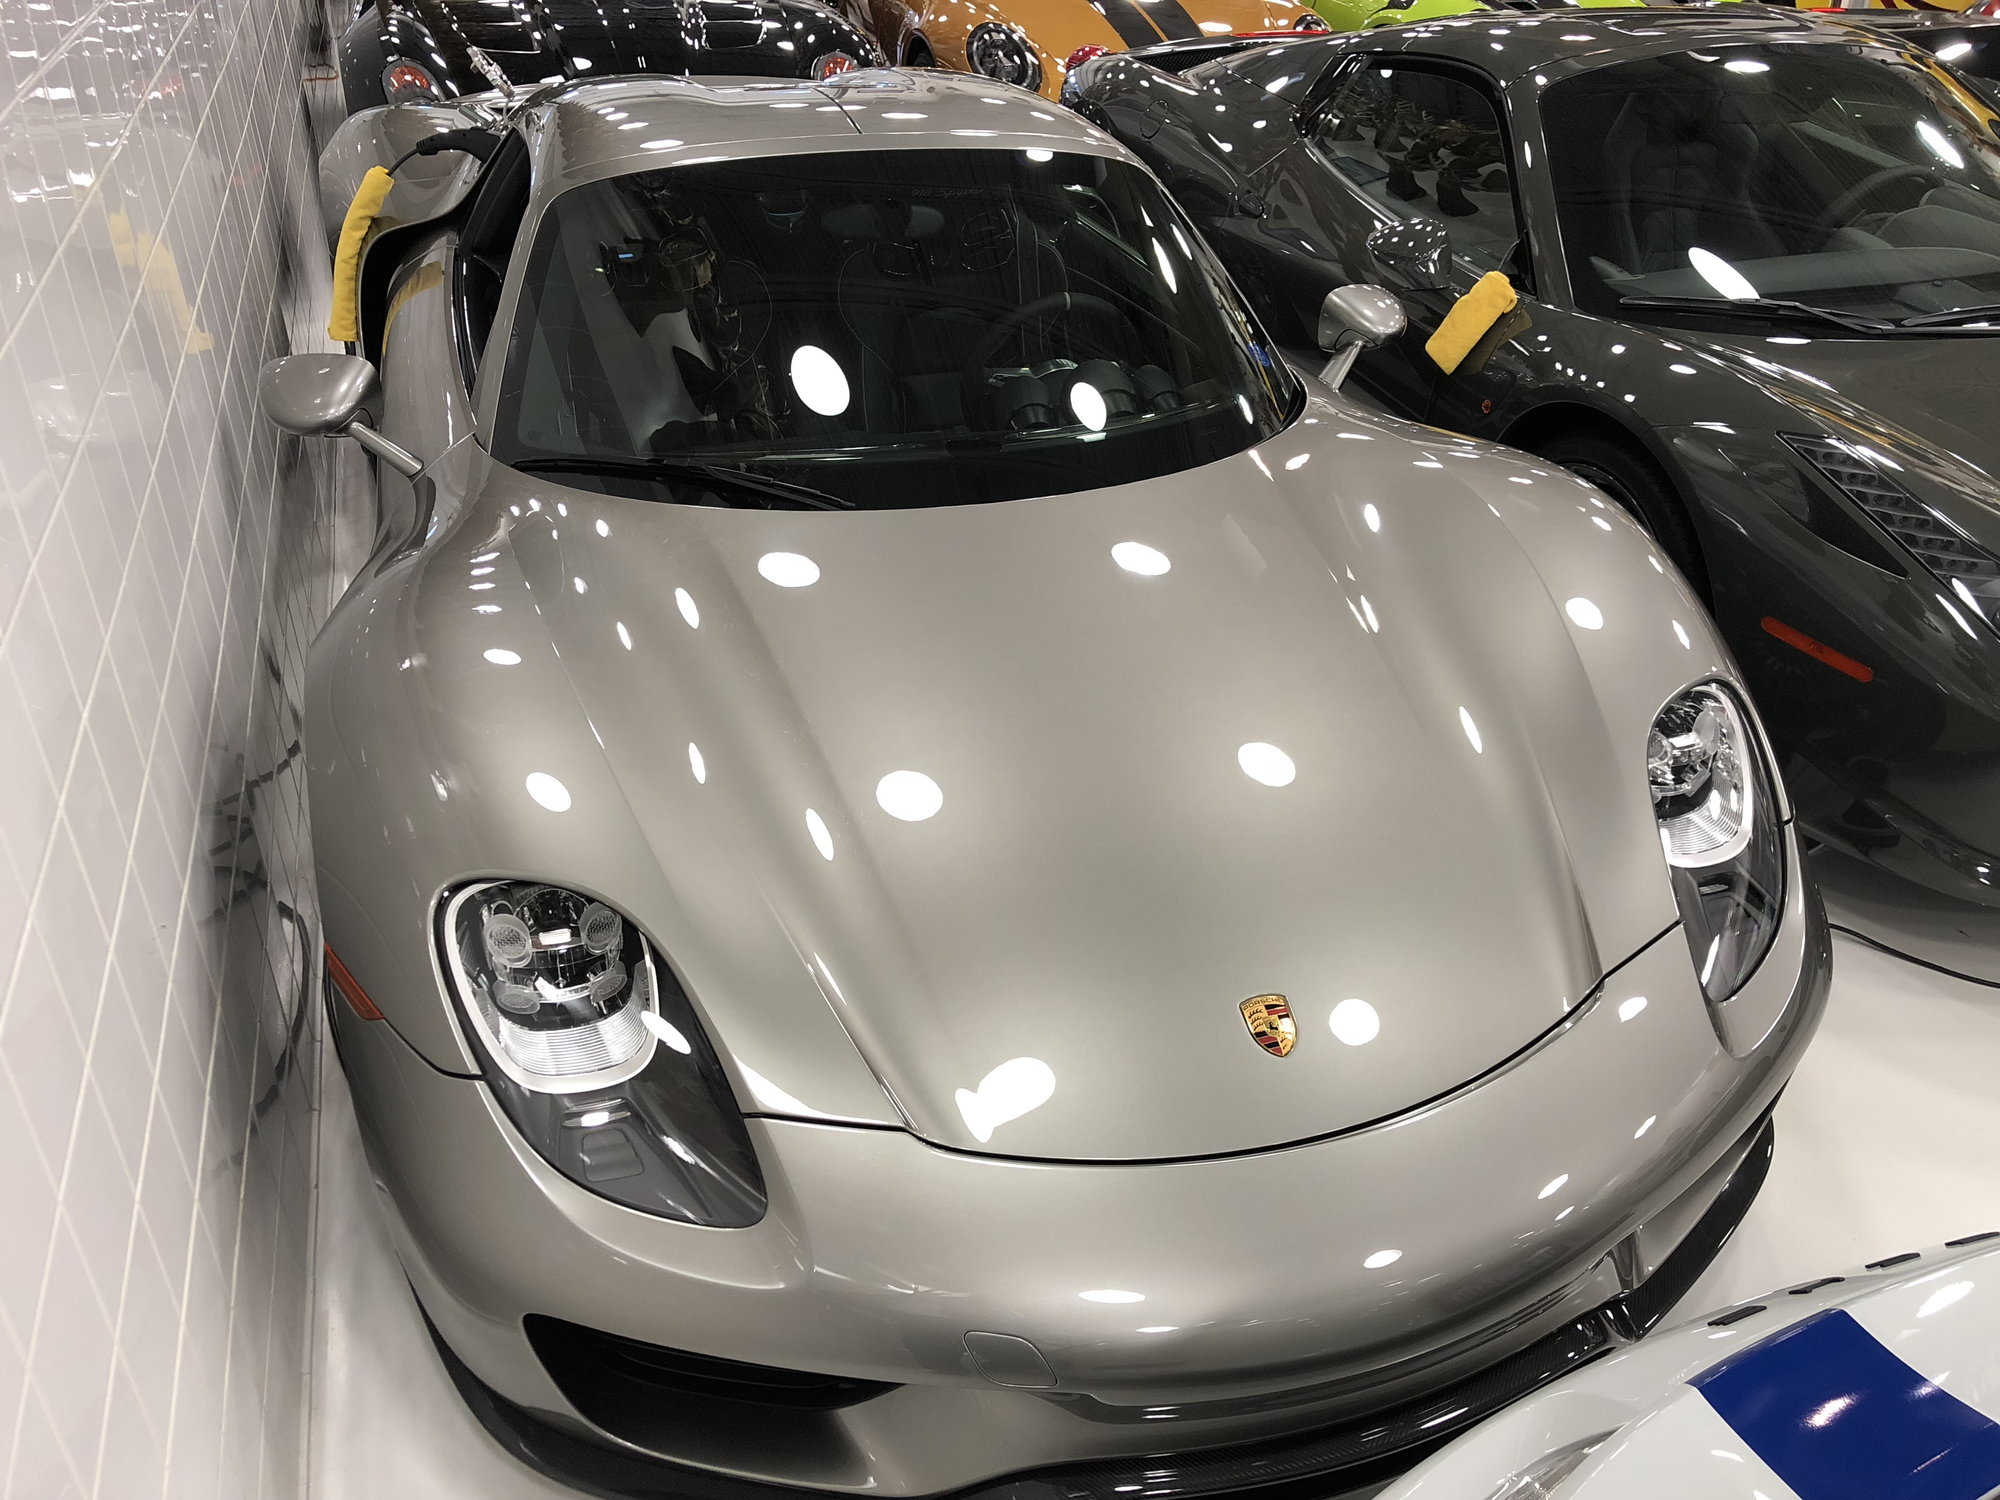 2015 Porsche 918 Spyder - 2015 Porsche 918 Spyder Liquid Metal Silver Only 119 Miles Original Owner No.373 - Used - VIN WP0CA2A12FS800373 - 119 Miles - 8 cyl - AWD - Convertible - Silver - Champaign, IL 61820, United States